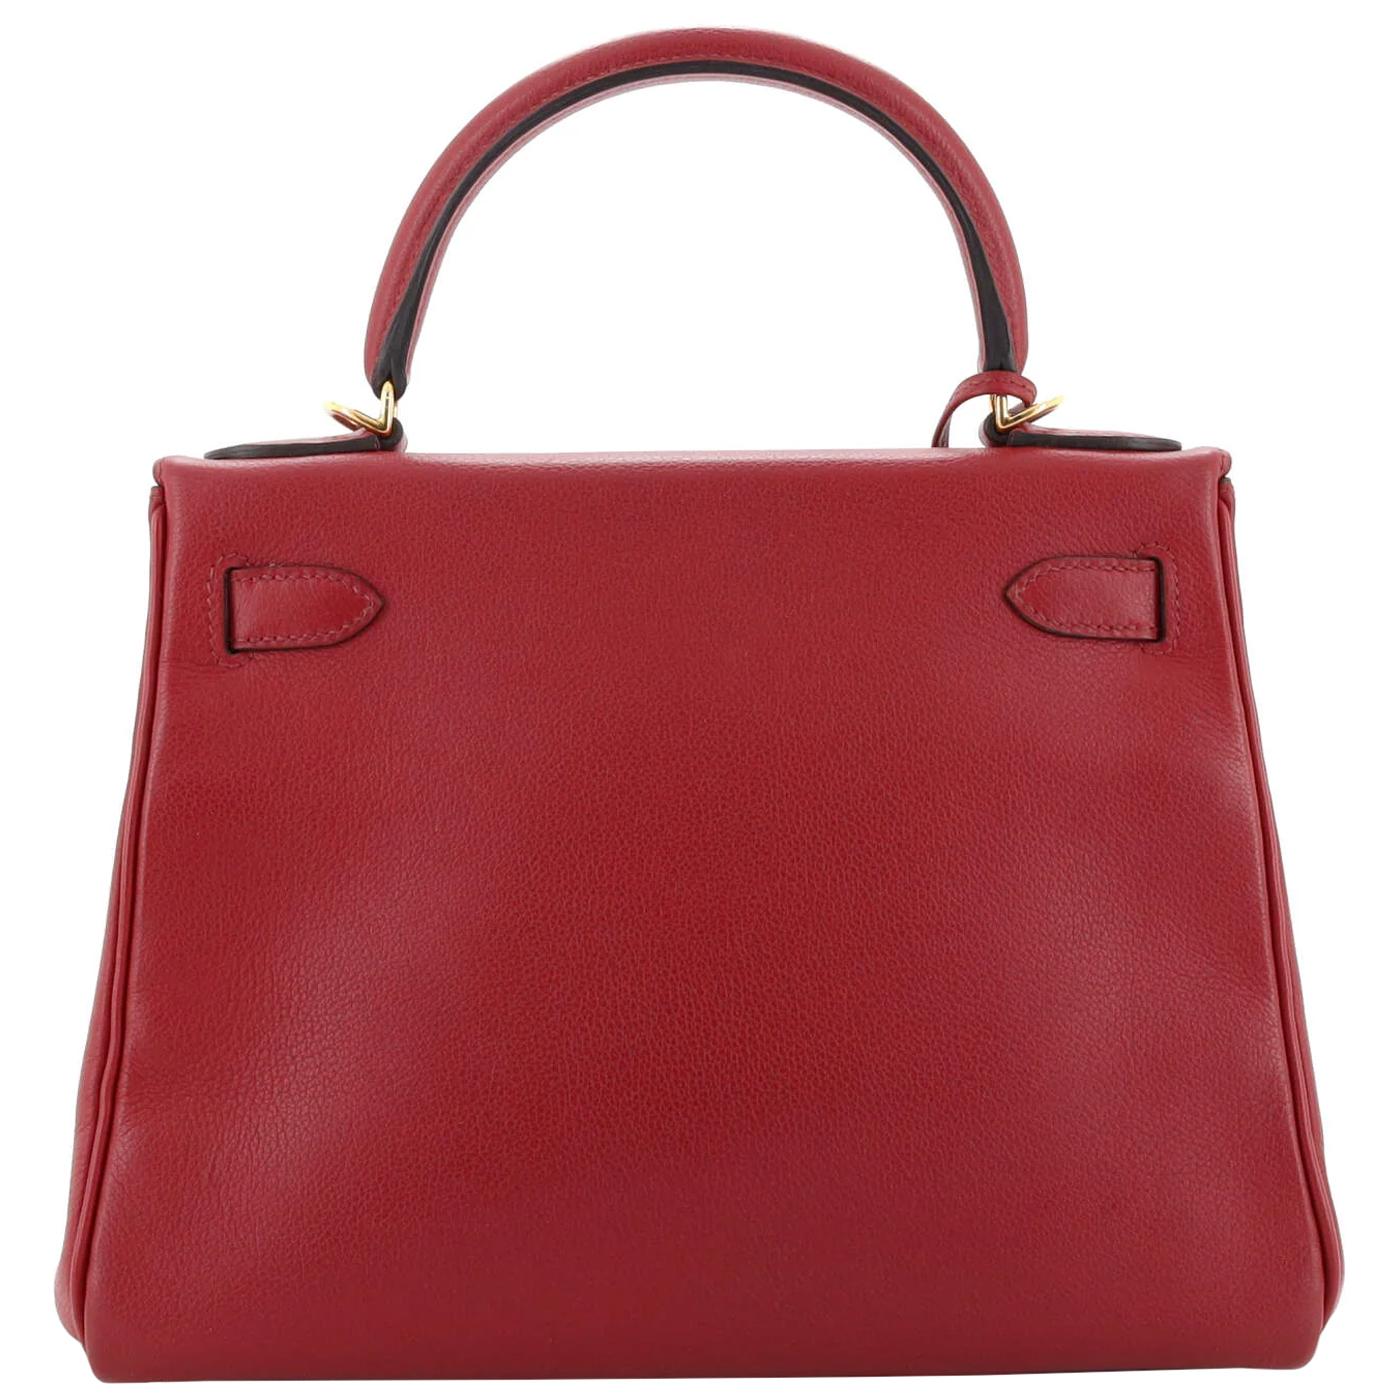 Hermes Kelly Handbag Leather Rouge Grenat Evercolor with Gold Hardware 28 In Good Condition For Sale In Aventura, FL